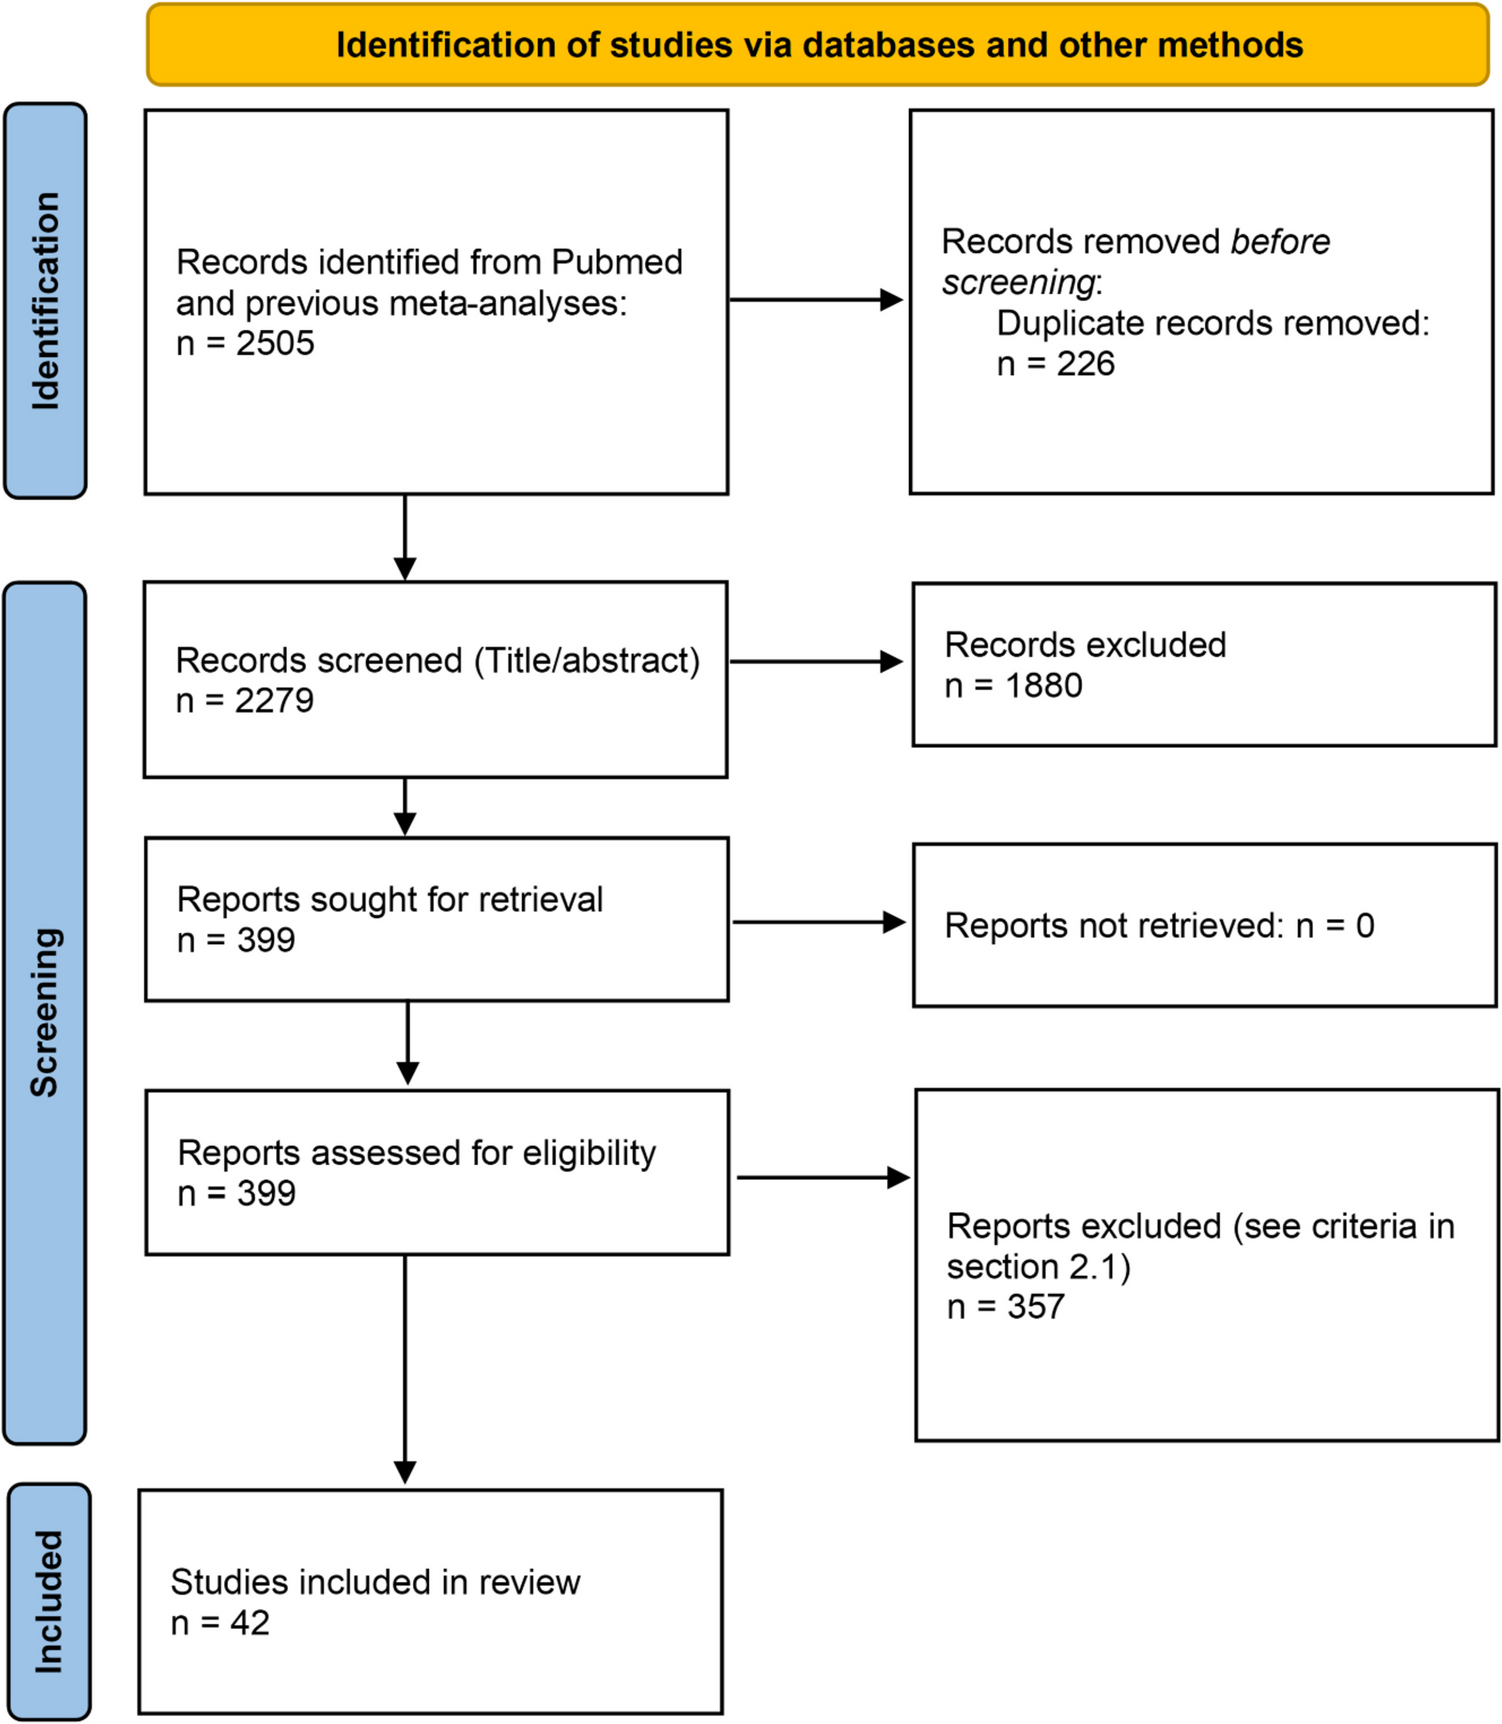 The Neurocognitive Bases of Meaningful Intransitive Gestures: A Systematic Review and Meta-analysis of Neuropsychological Studies